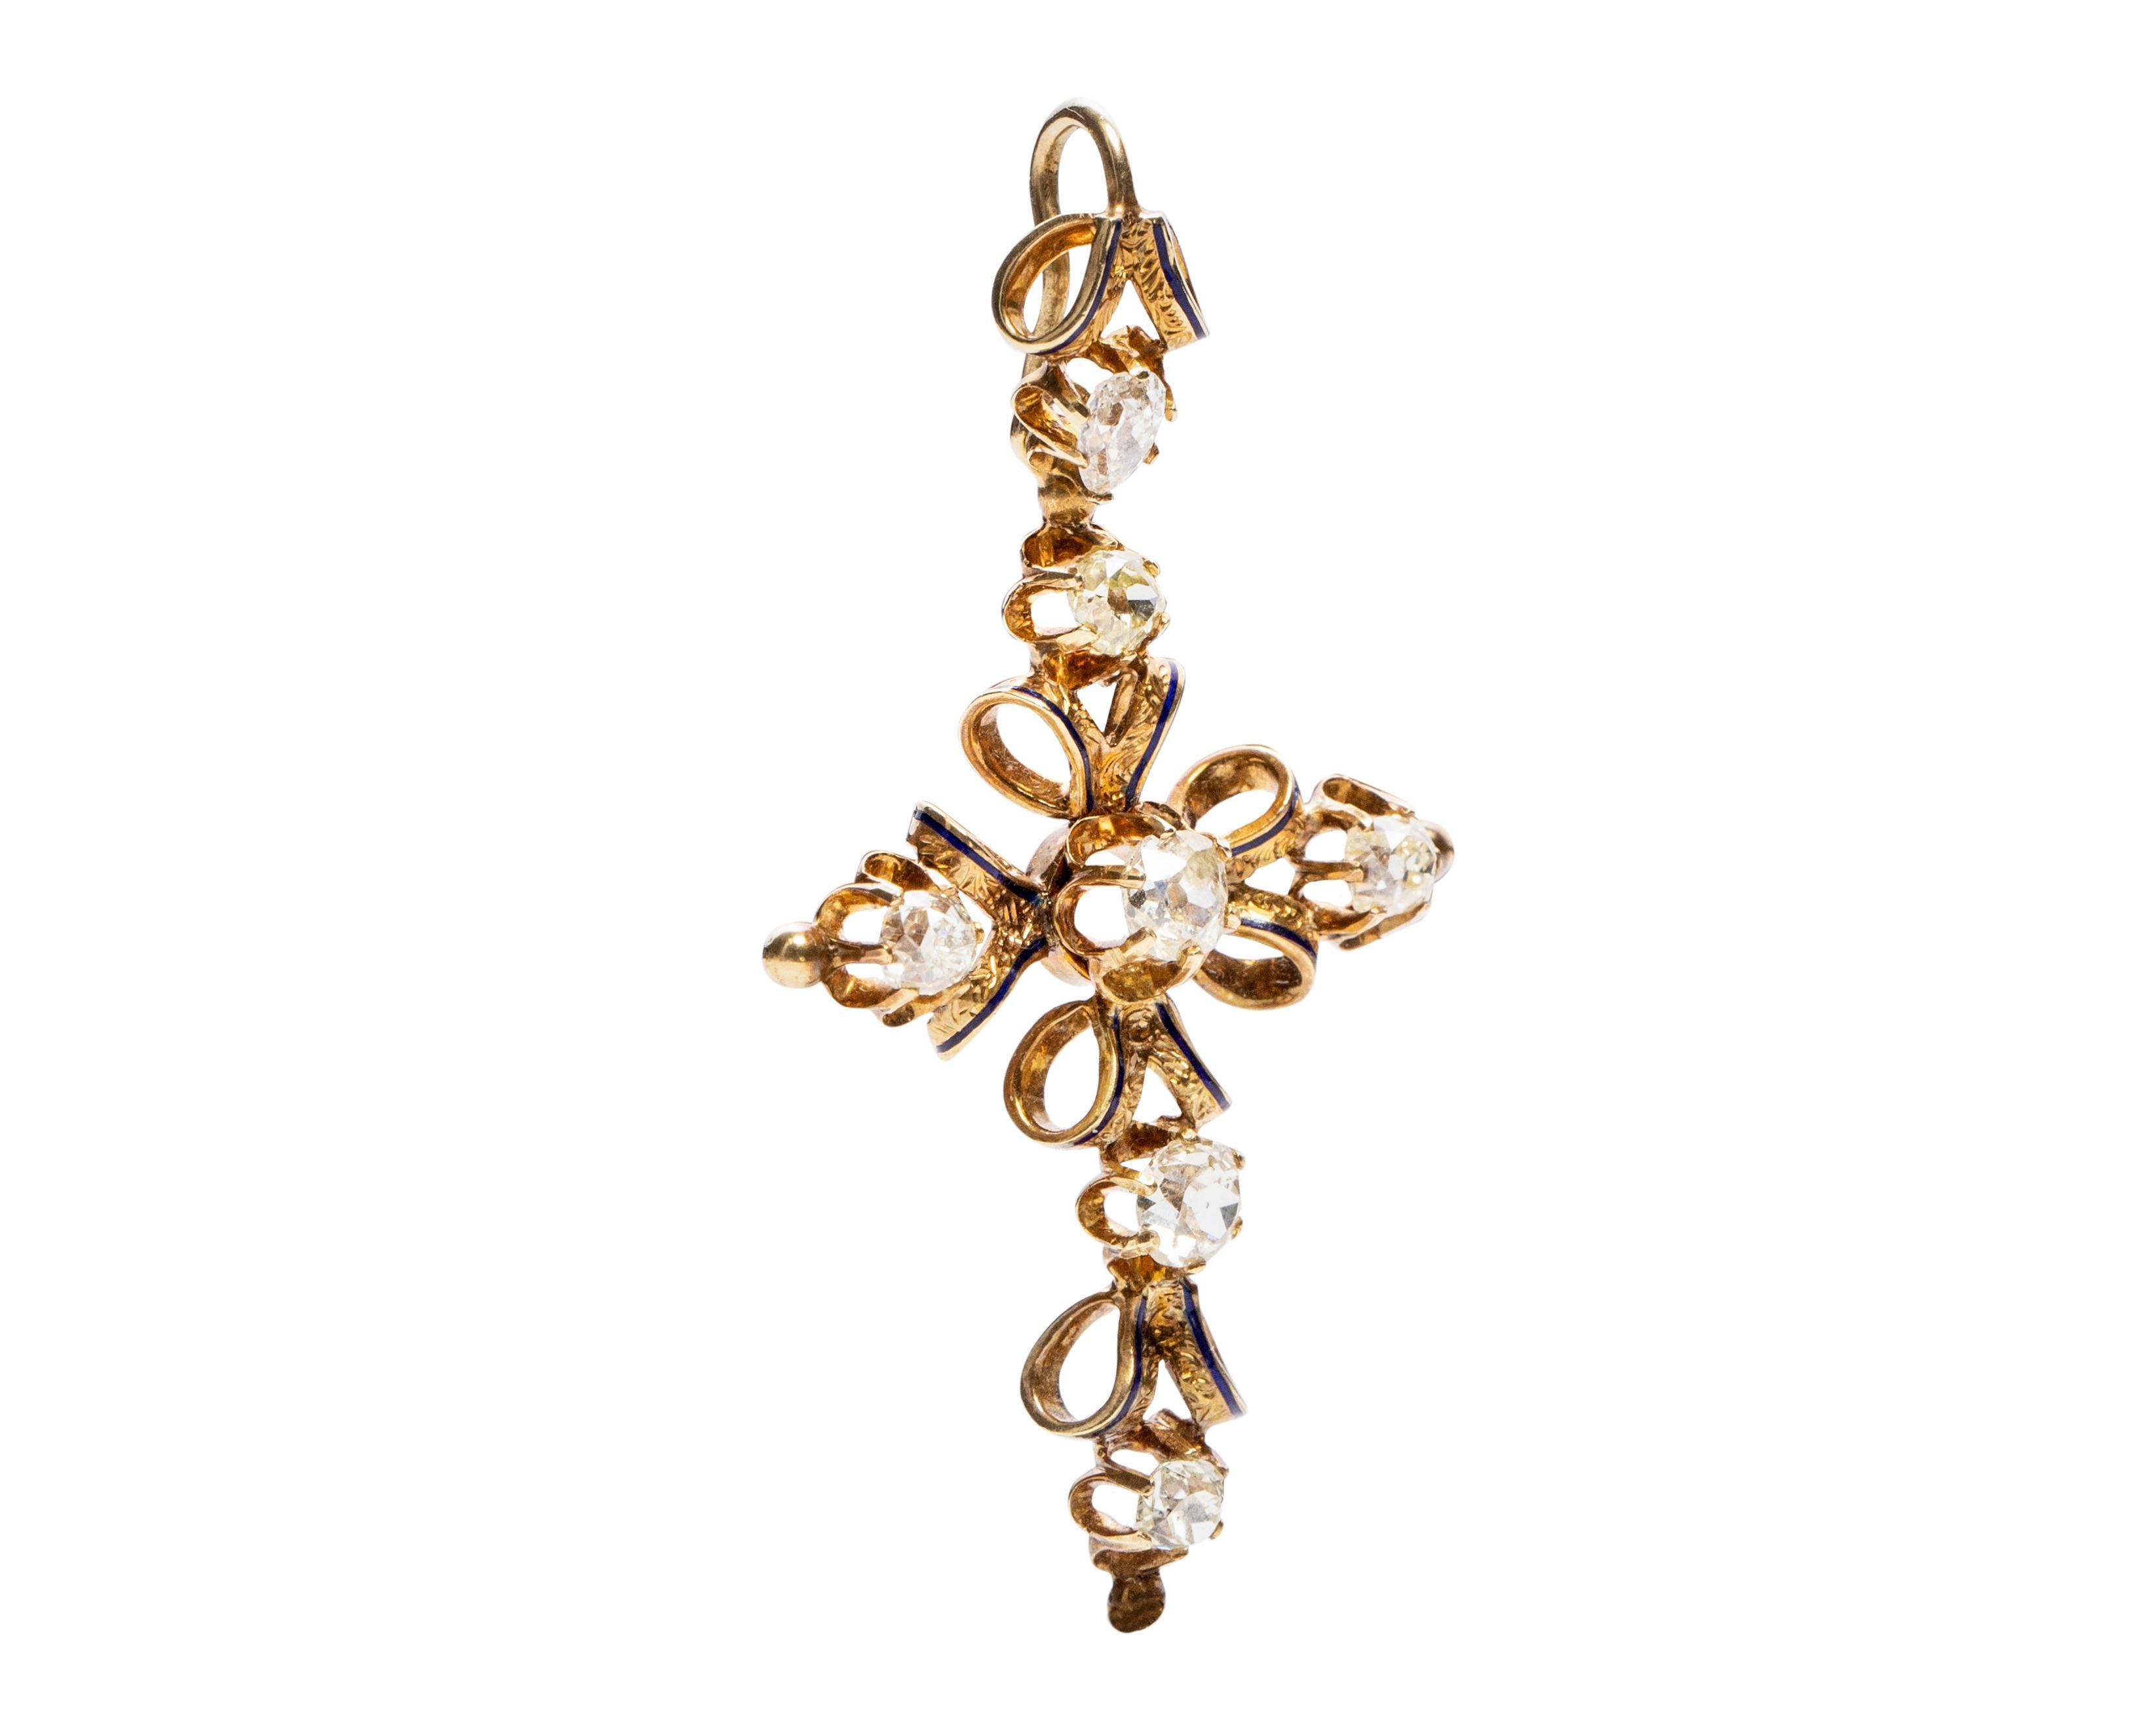 Here we have a breathtaking Antique Ribbon design French Cross pendant, this cross is adorned with 6 beautiful old cut diamonds that have a lot of life, with a warm hue. This cross has exquisite filigree engraving and a simple line of black enamel